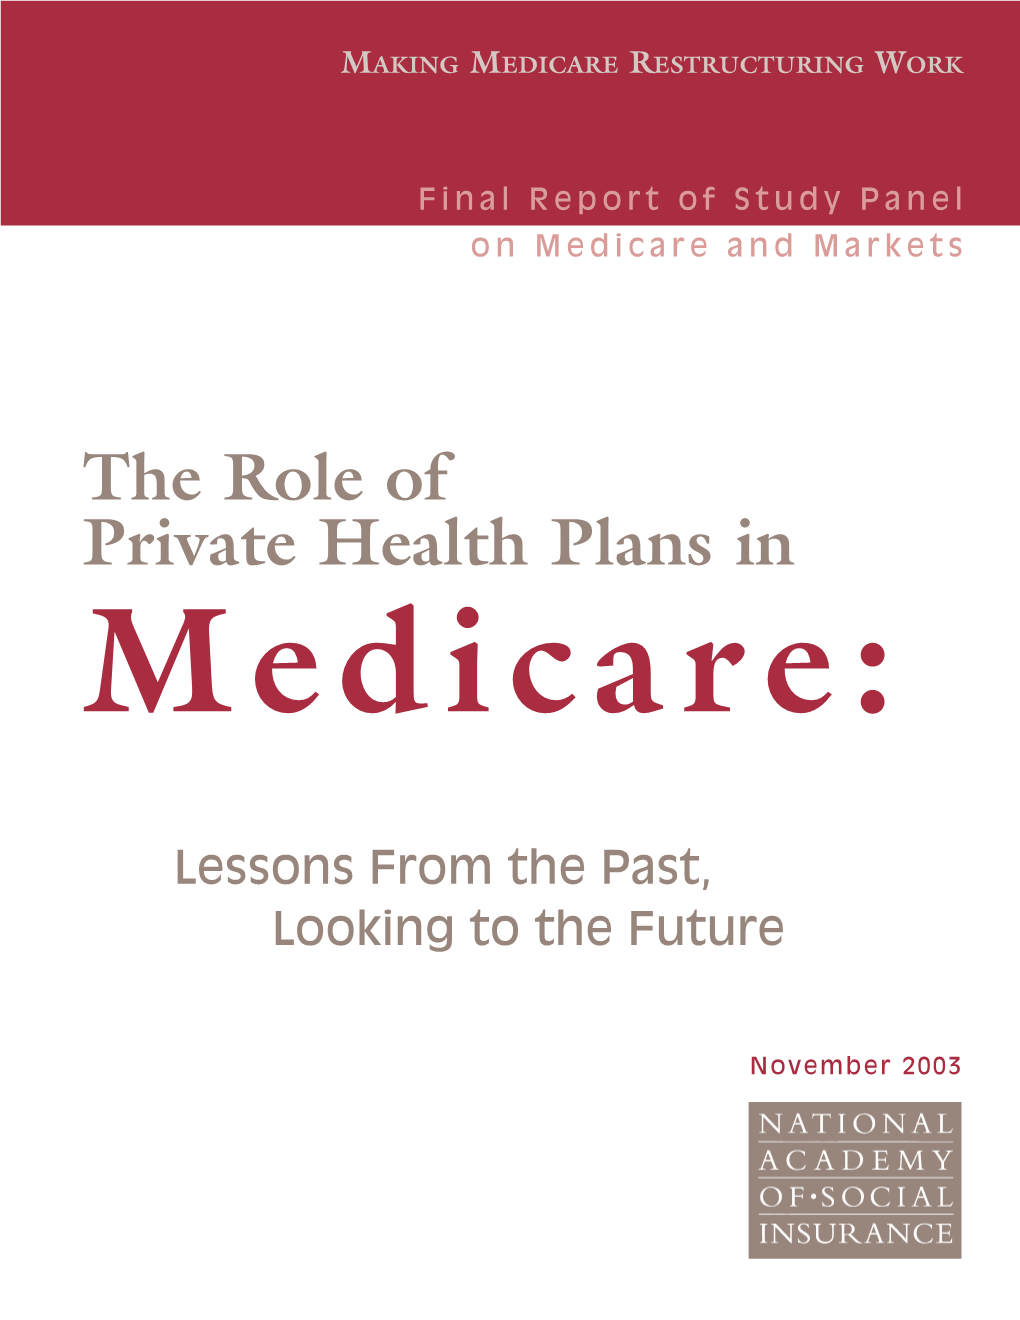 The Role of Private Health Plans in Medicare